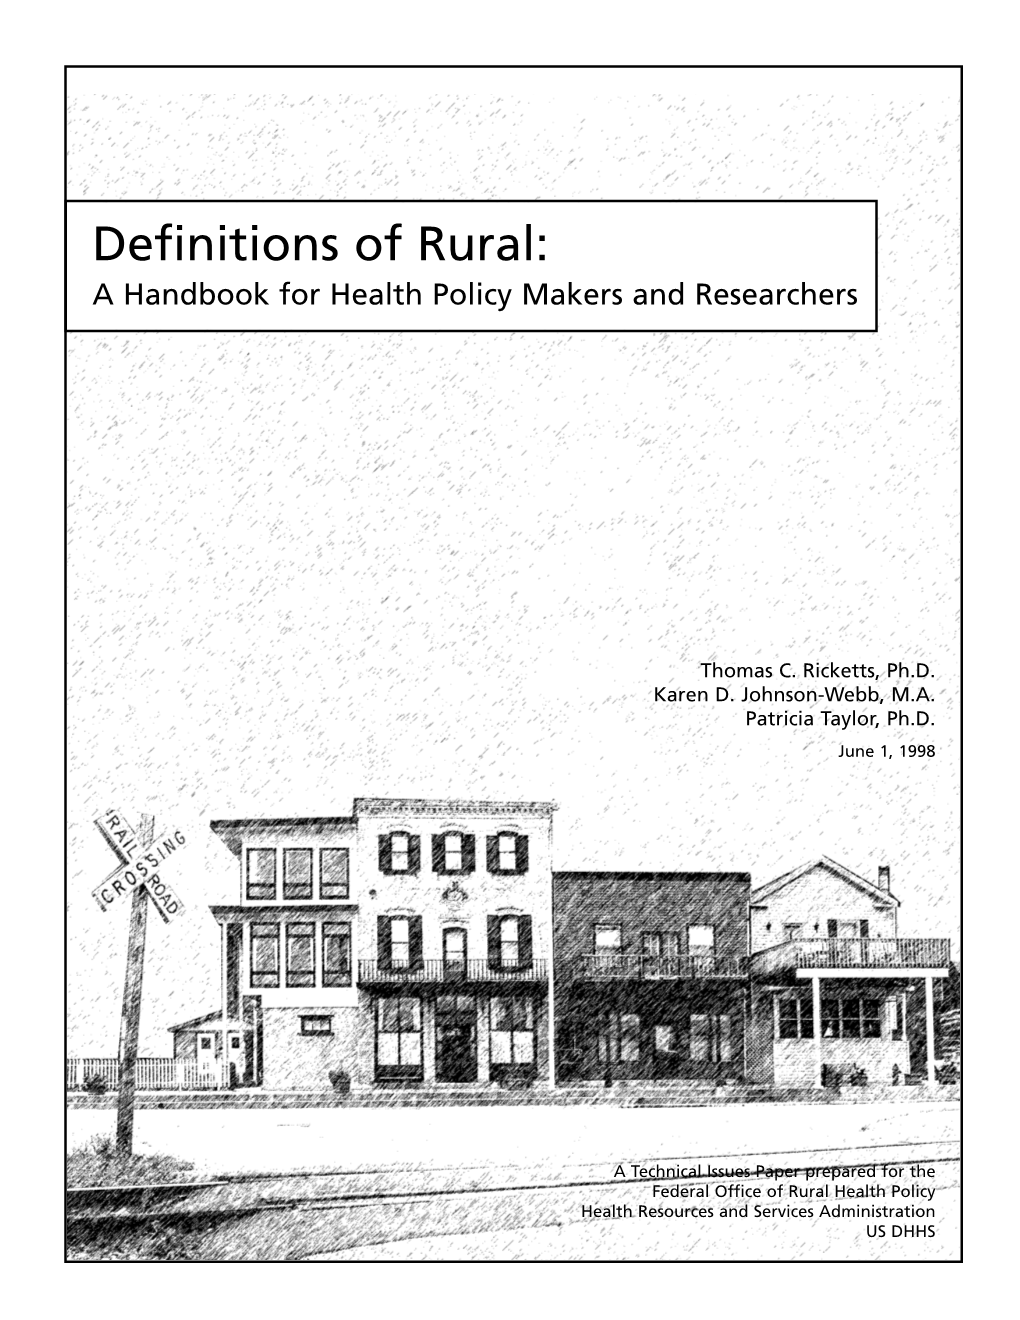 Definitions of Rural:A Handbook for Health Policy Makers And